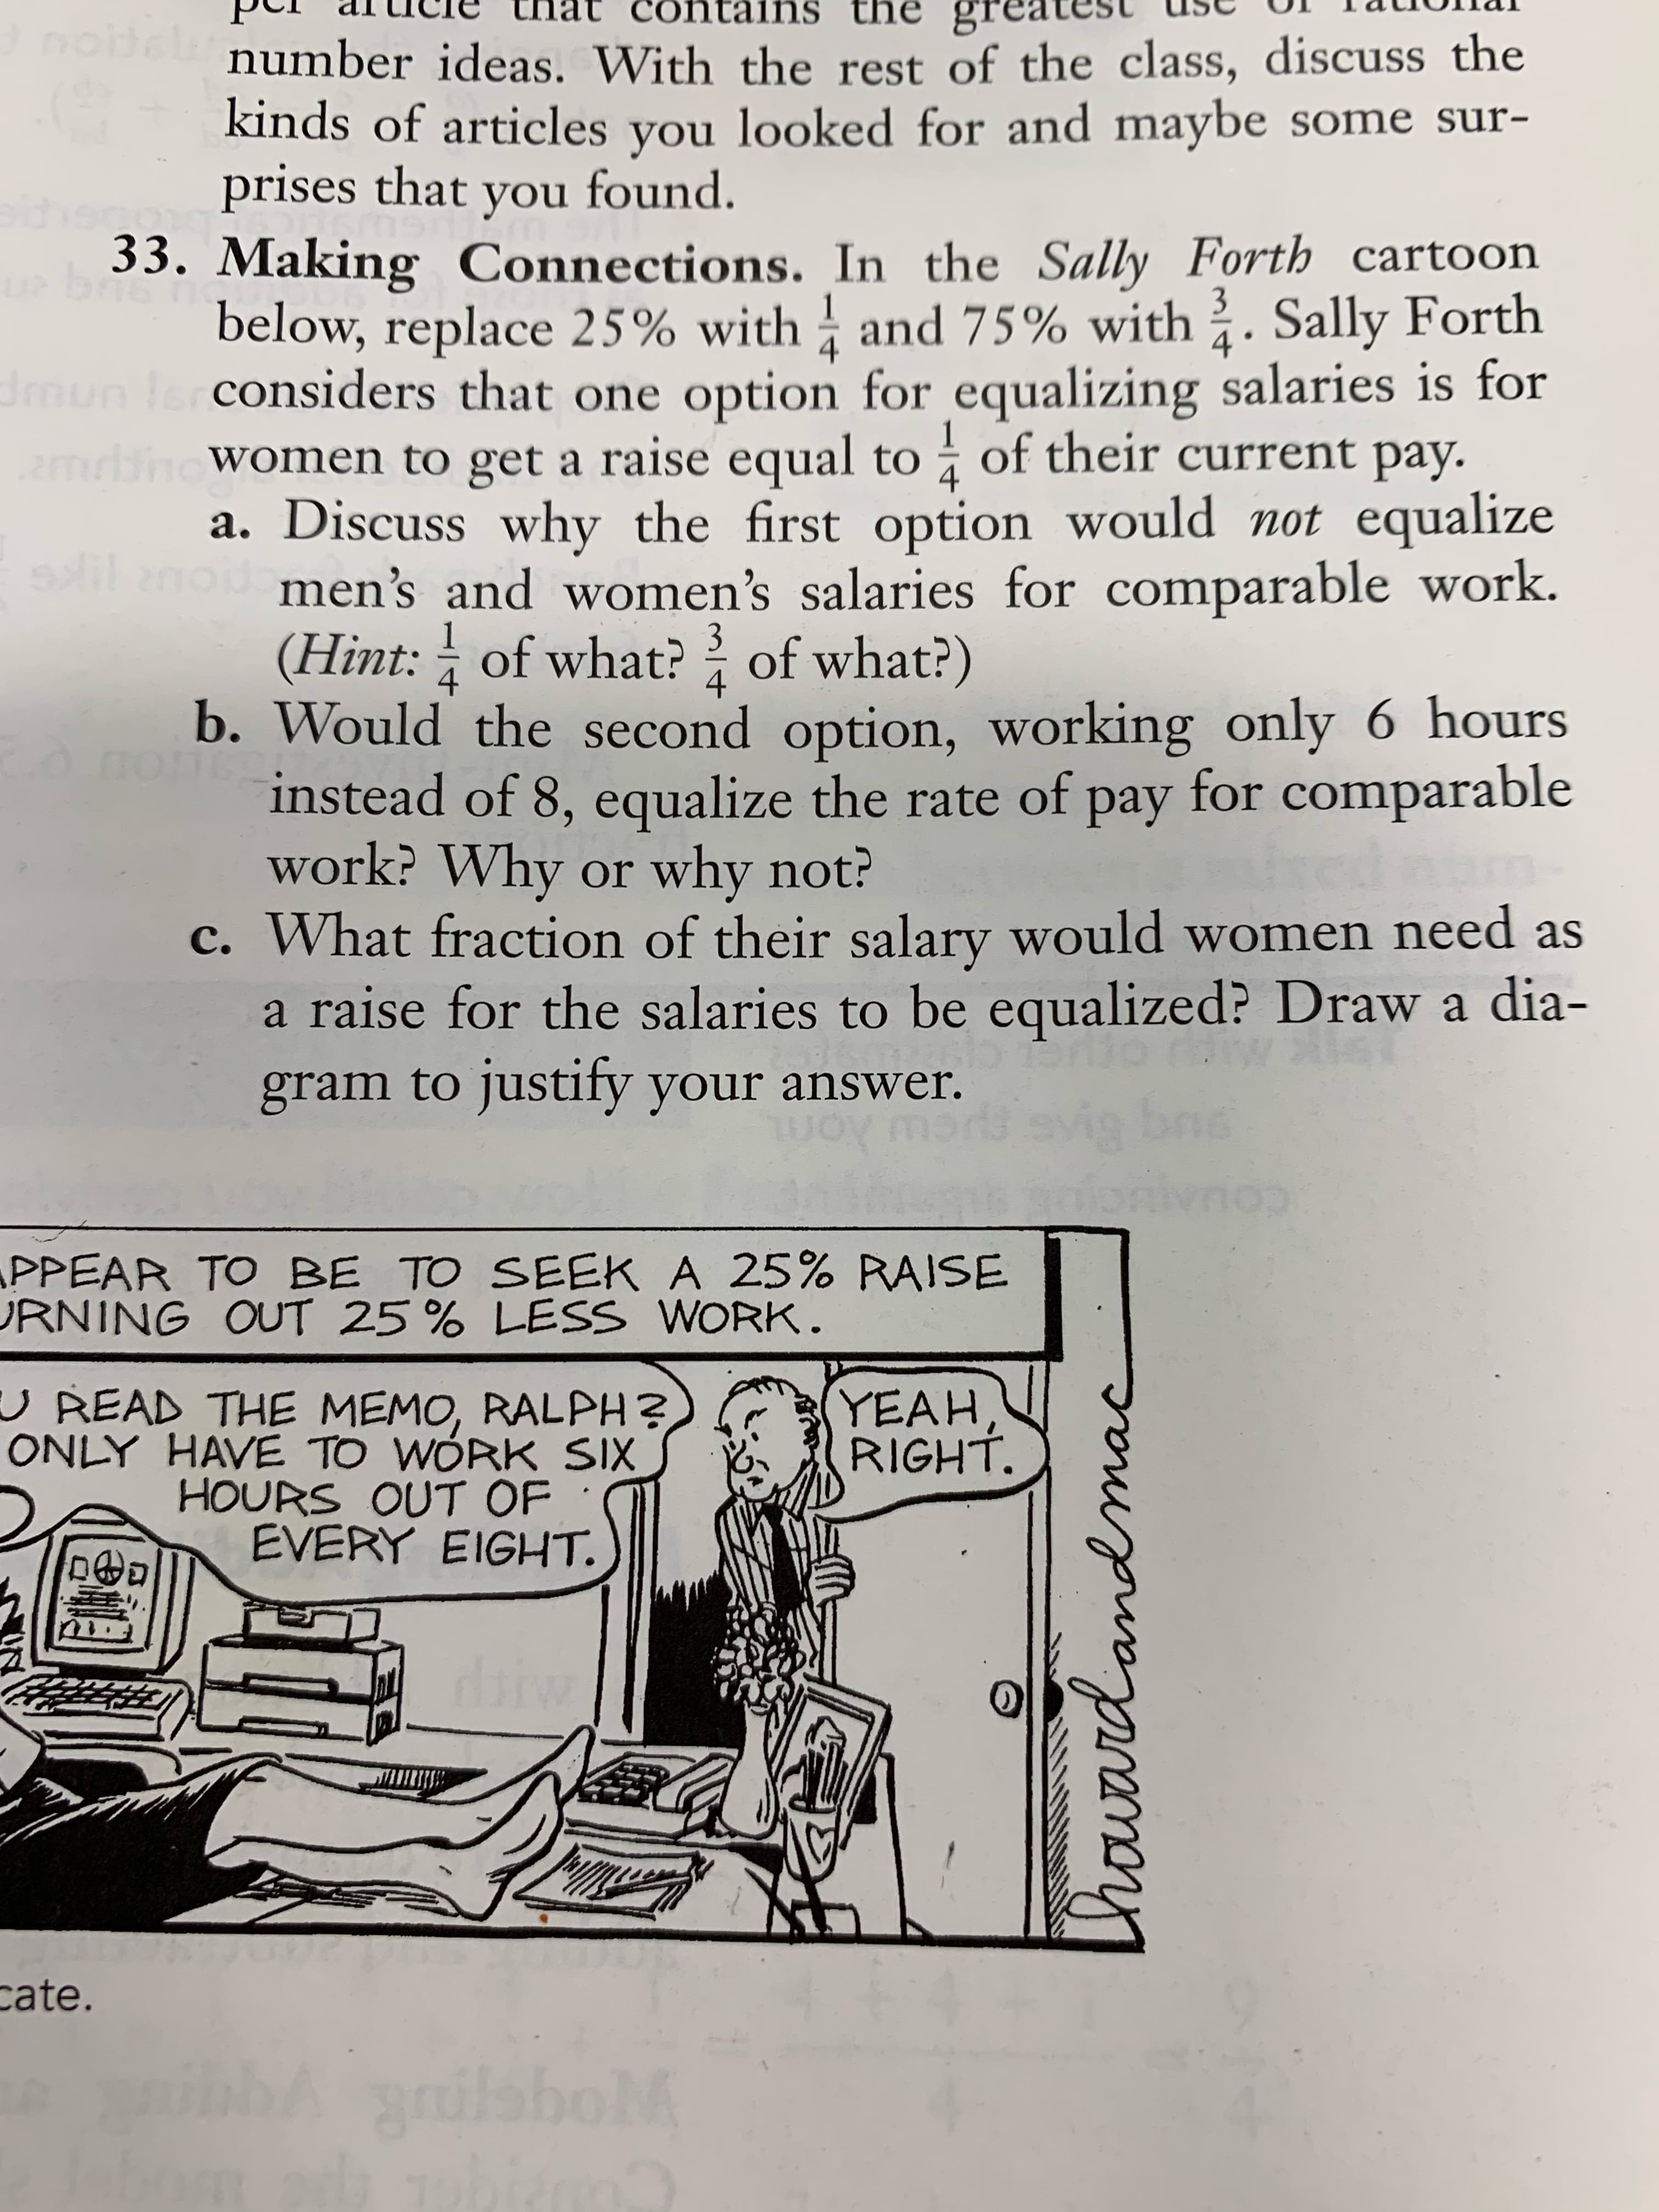 Lhioward an mac
the gre
number ideas. With the rest of the class, discuss the
kinds of articles you looked for and maybe some sur-
ins
prises that you found.
33. Making Connections. In the Sally Forth cartoon
below, replace 25% with and 75% with . Sally Forth
considers that one option for equalizing salaries is for
emrbino Women to get a raise equal to of their current pay.
a. Discuss why the first option would not equalize
men's and women's salaries for comparable work.
dmu
3.
b. Would the second option, working only 6 hours
instead of 8, equalize the rate of pay for comparable
(Hint: of what? of what?)
4.
work? Why or why not?
c. What fraction of their salary would women need as
a raise for the salaries to be equalized? Draw a dia-
gram to justify your answer.
PPEAR TO BE TO SEEK A 25% RAISE
URNING OUT 25 % LESS WORK.
UREAD THE MEMO, RALPH?
ONLY HAVE TO WÓRK SIX
HOURS OUT OF
EVERY EIGHT.
YEAH,
cate.
ib grilaboM
